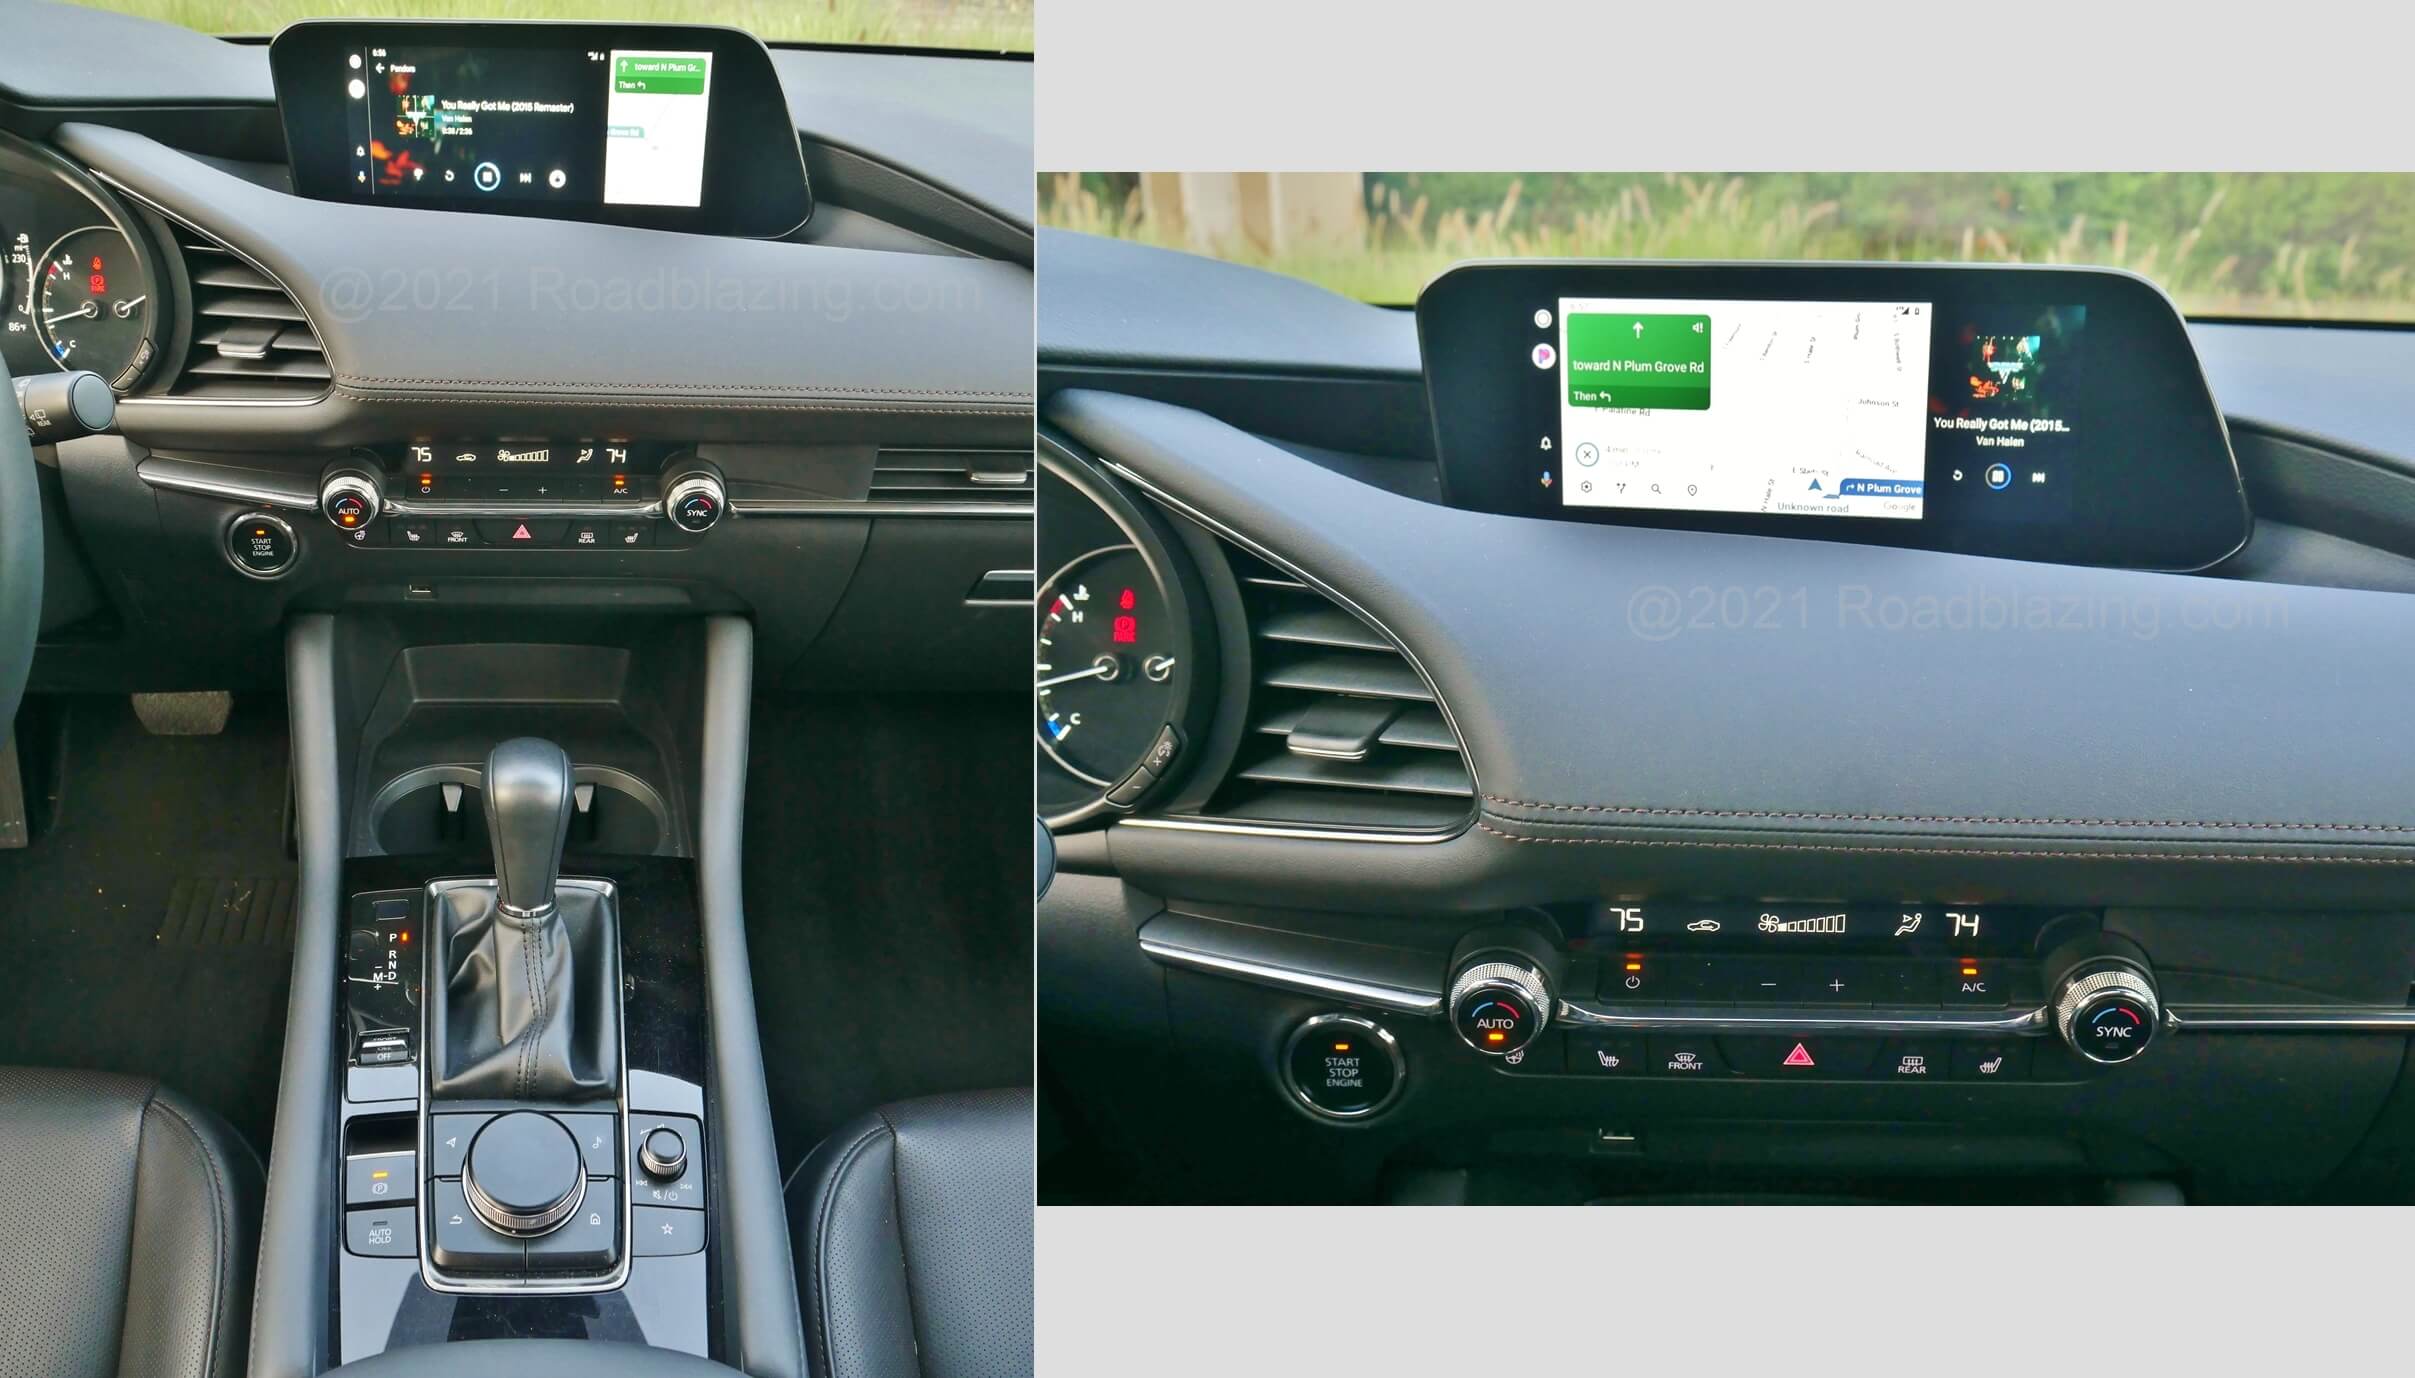 2021 Mazda 3 2.5 Turbo Hatchback: Split pane 8.8" remote commanded LCD media display uniquely splits Android Auto projection layouts as well.